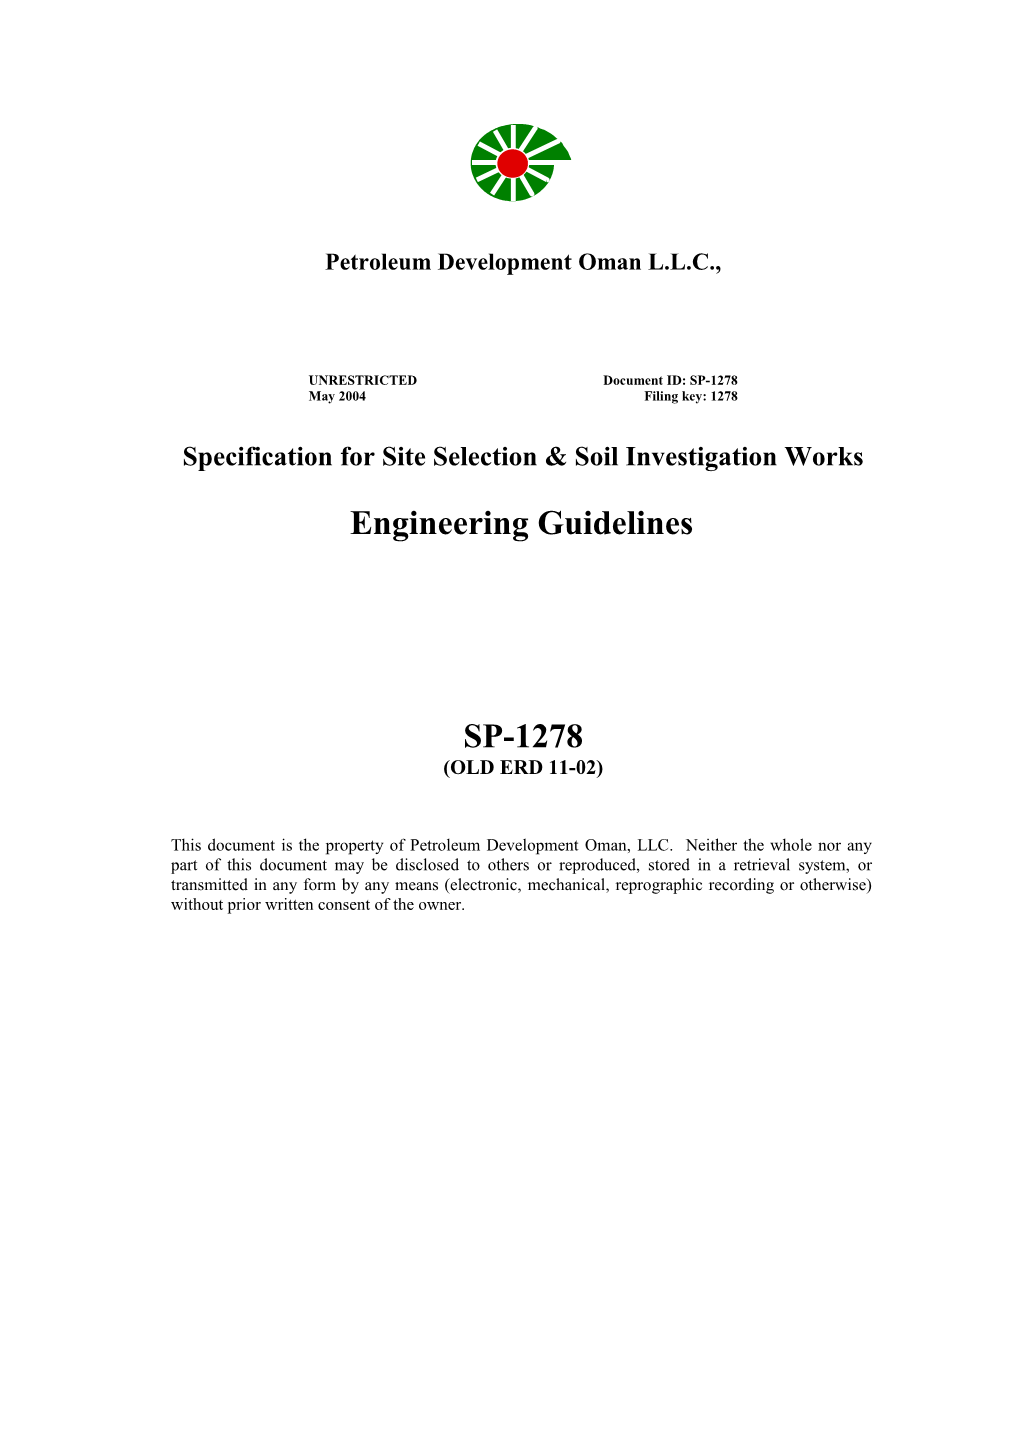 SP-1278 - Spec. For Site Selection & Soil Investigation Works - Engg. Guidelines